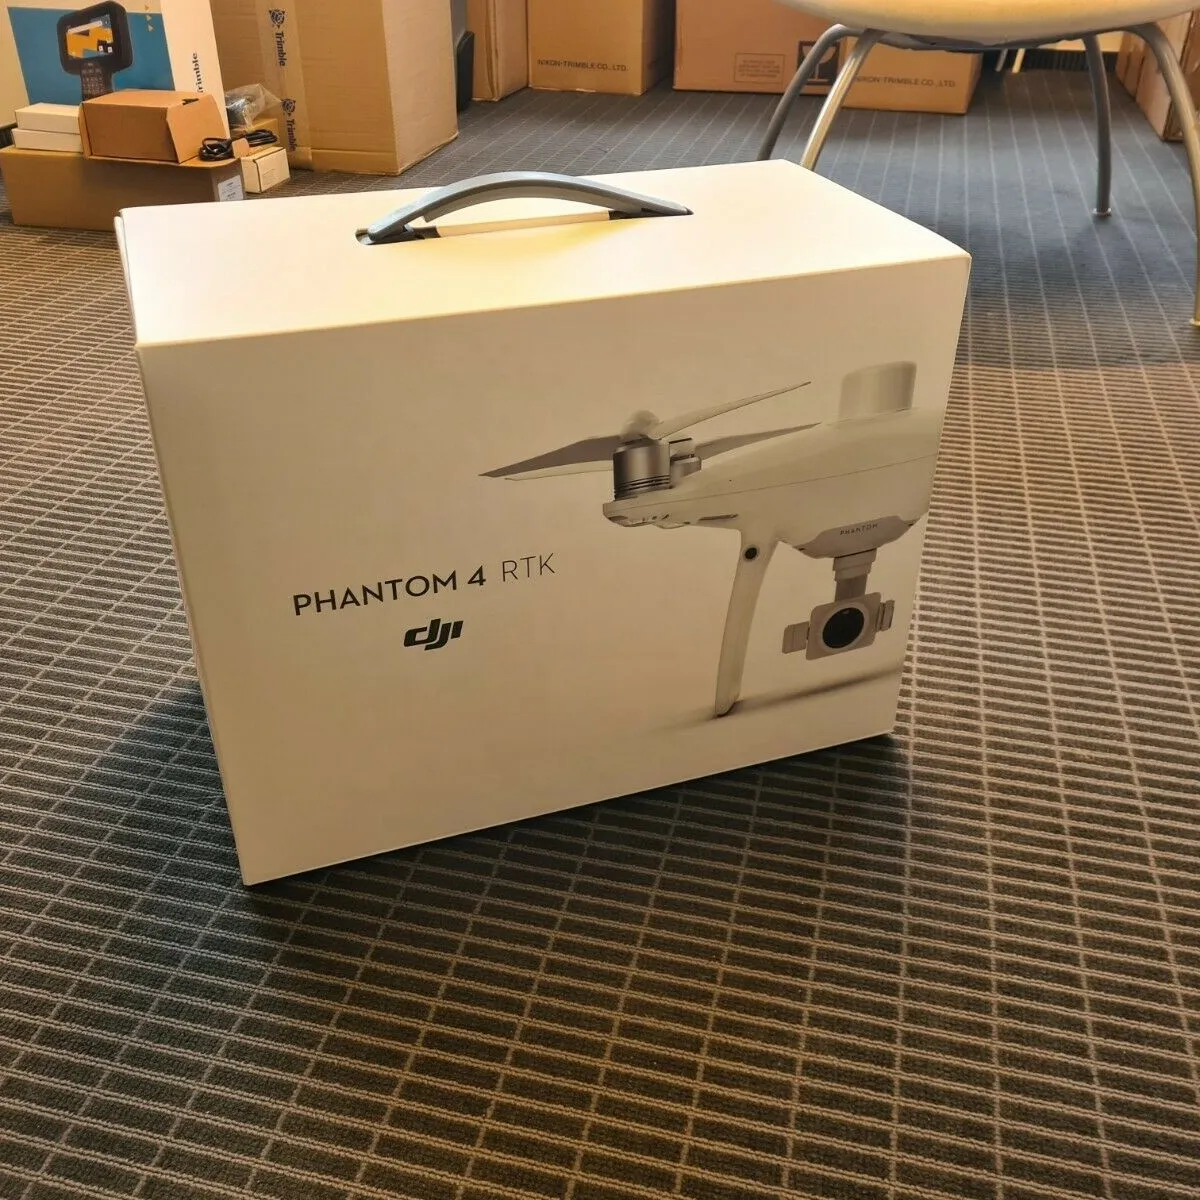 100% Original and Brand New Sealed for DJI Phantom 4 RTK Drone with Built In 5.5" HD Screen